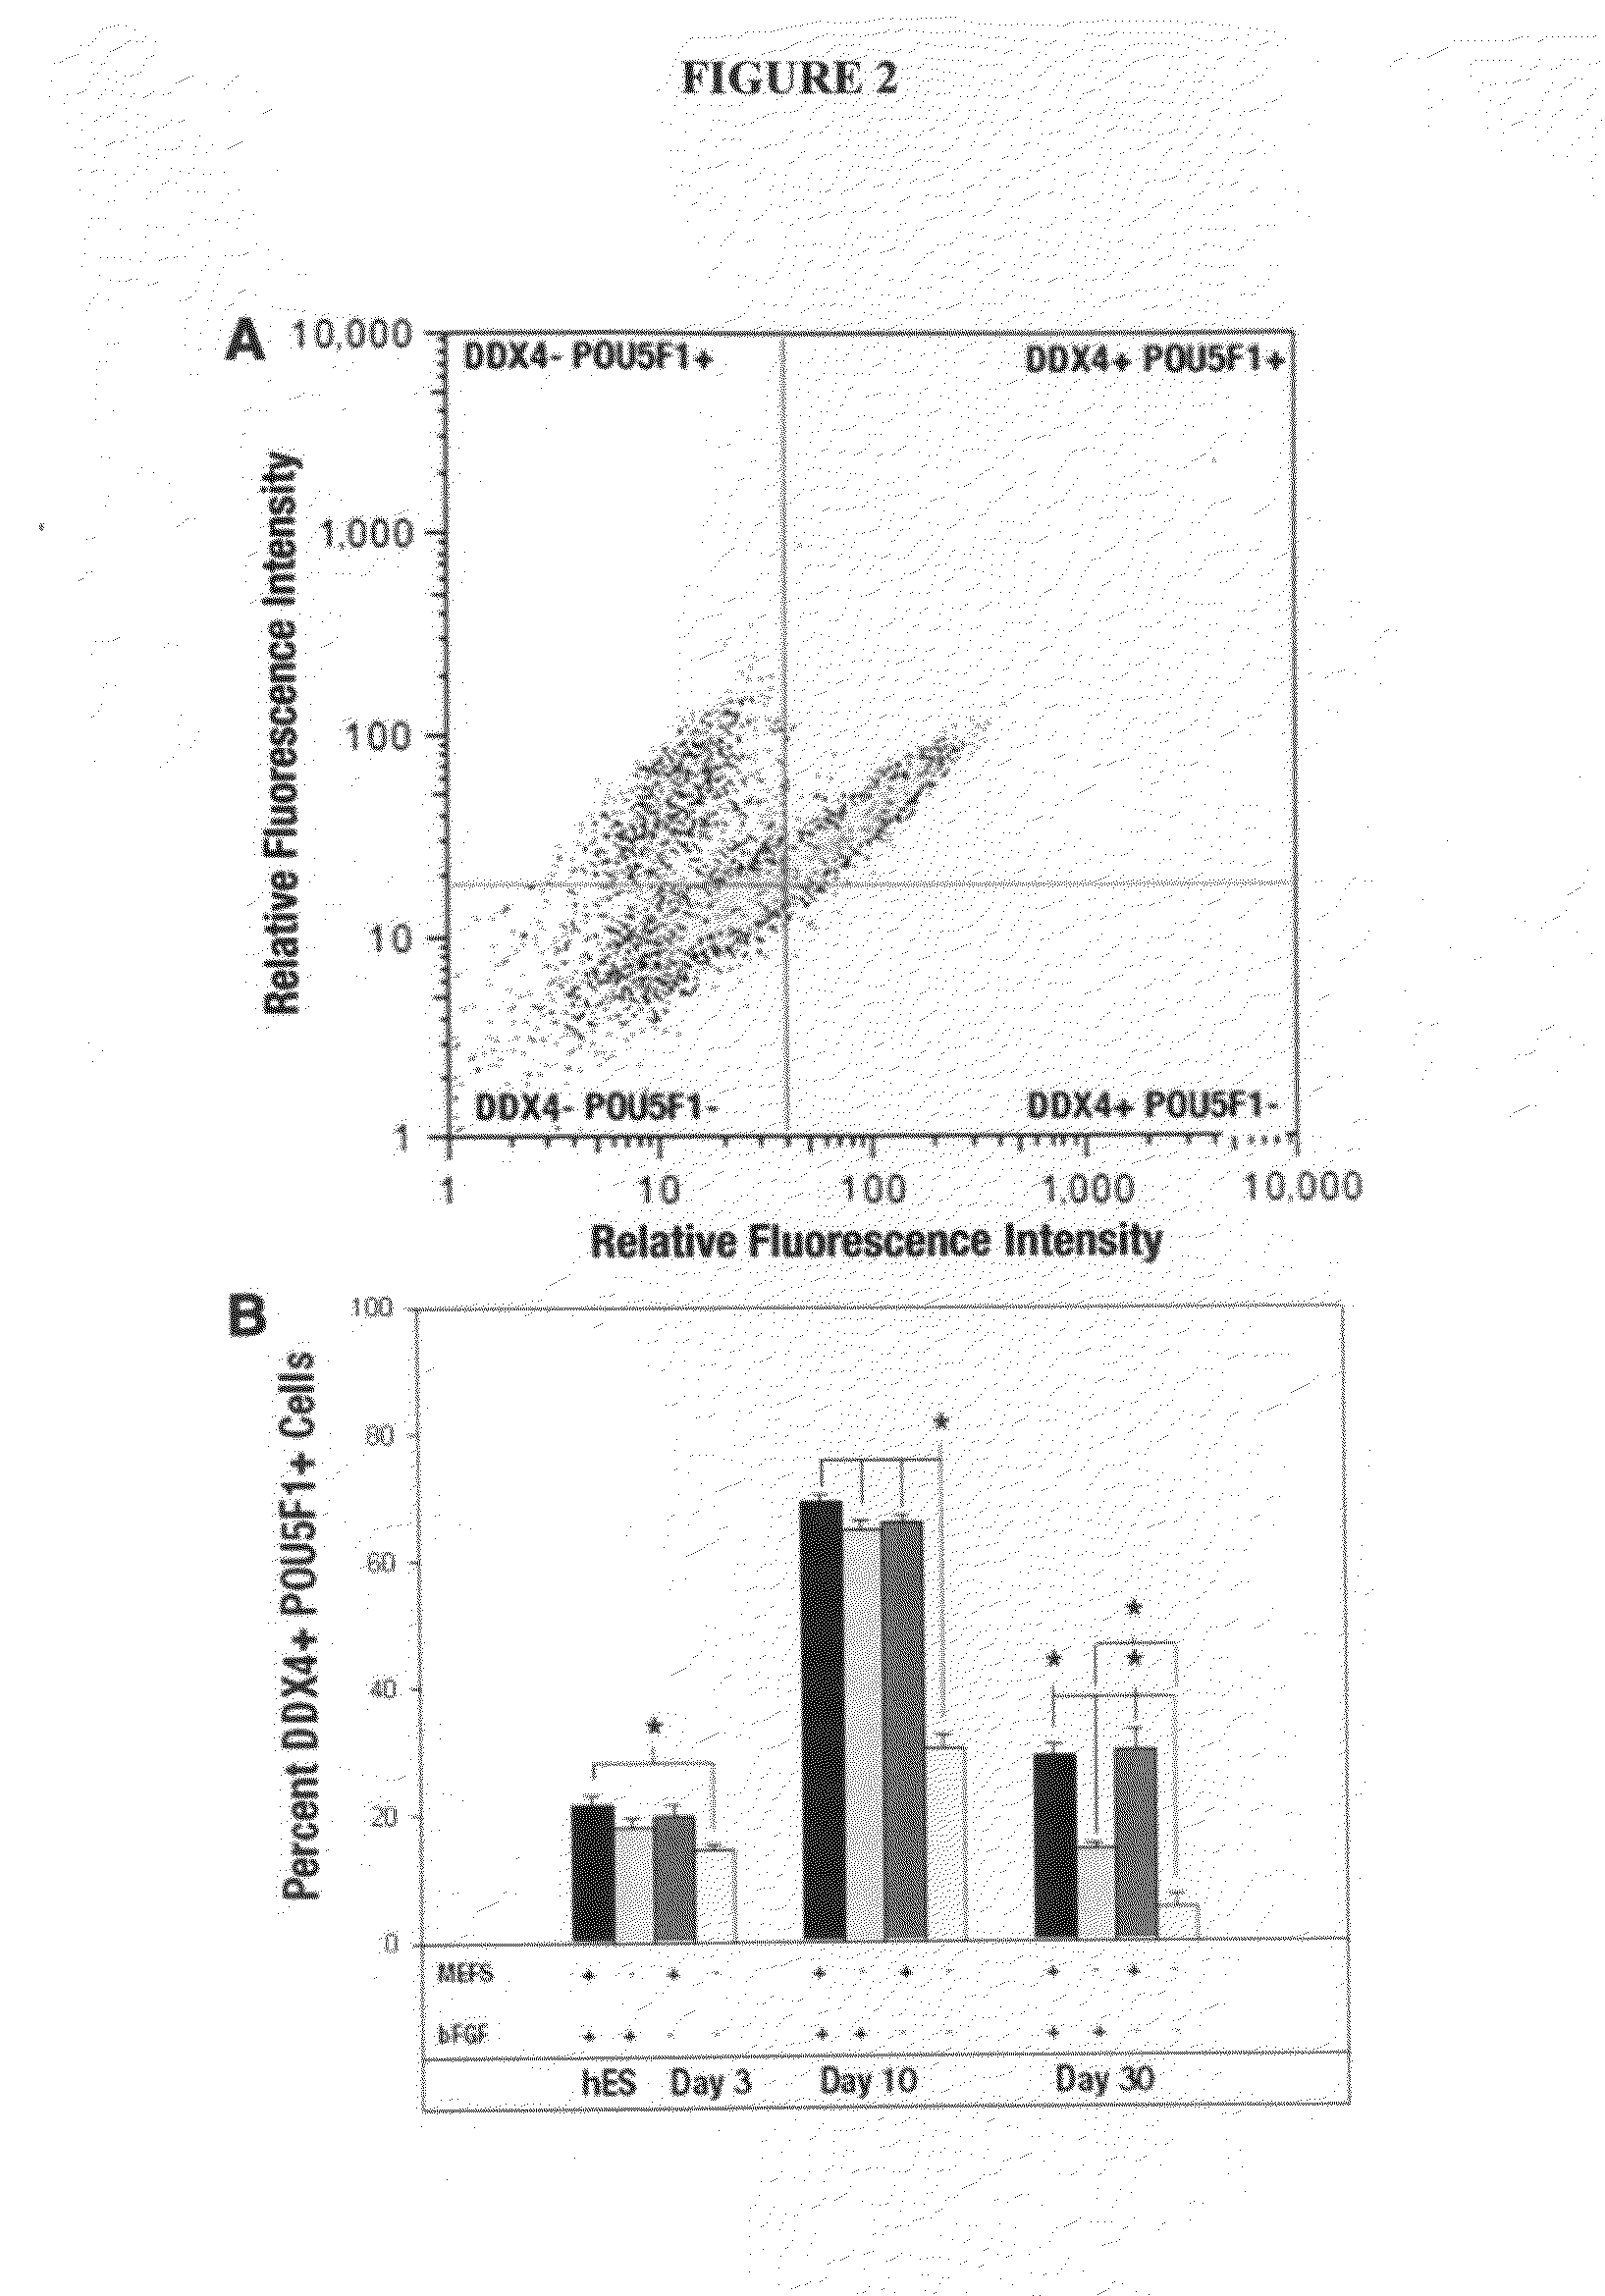 Methods of producing germ-like cells and related therapies